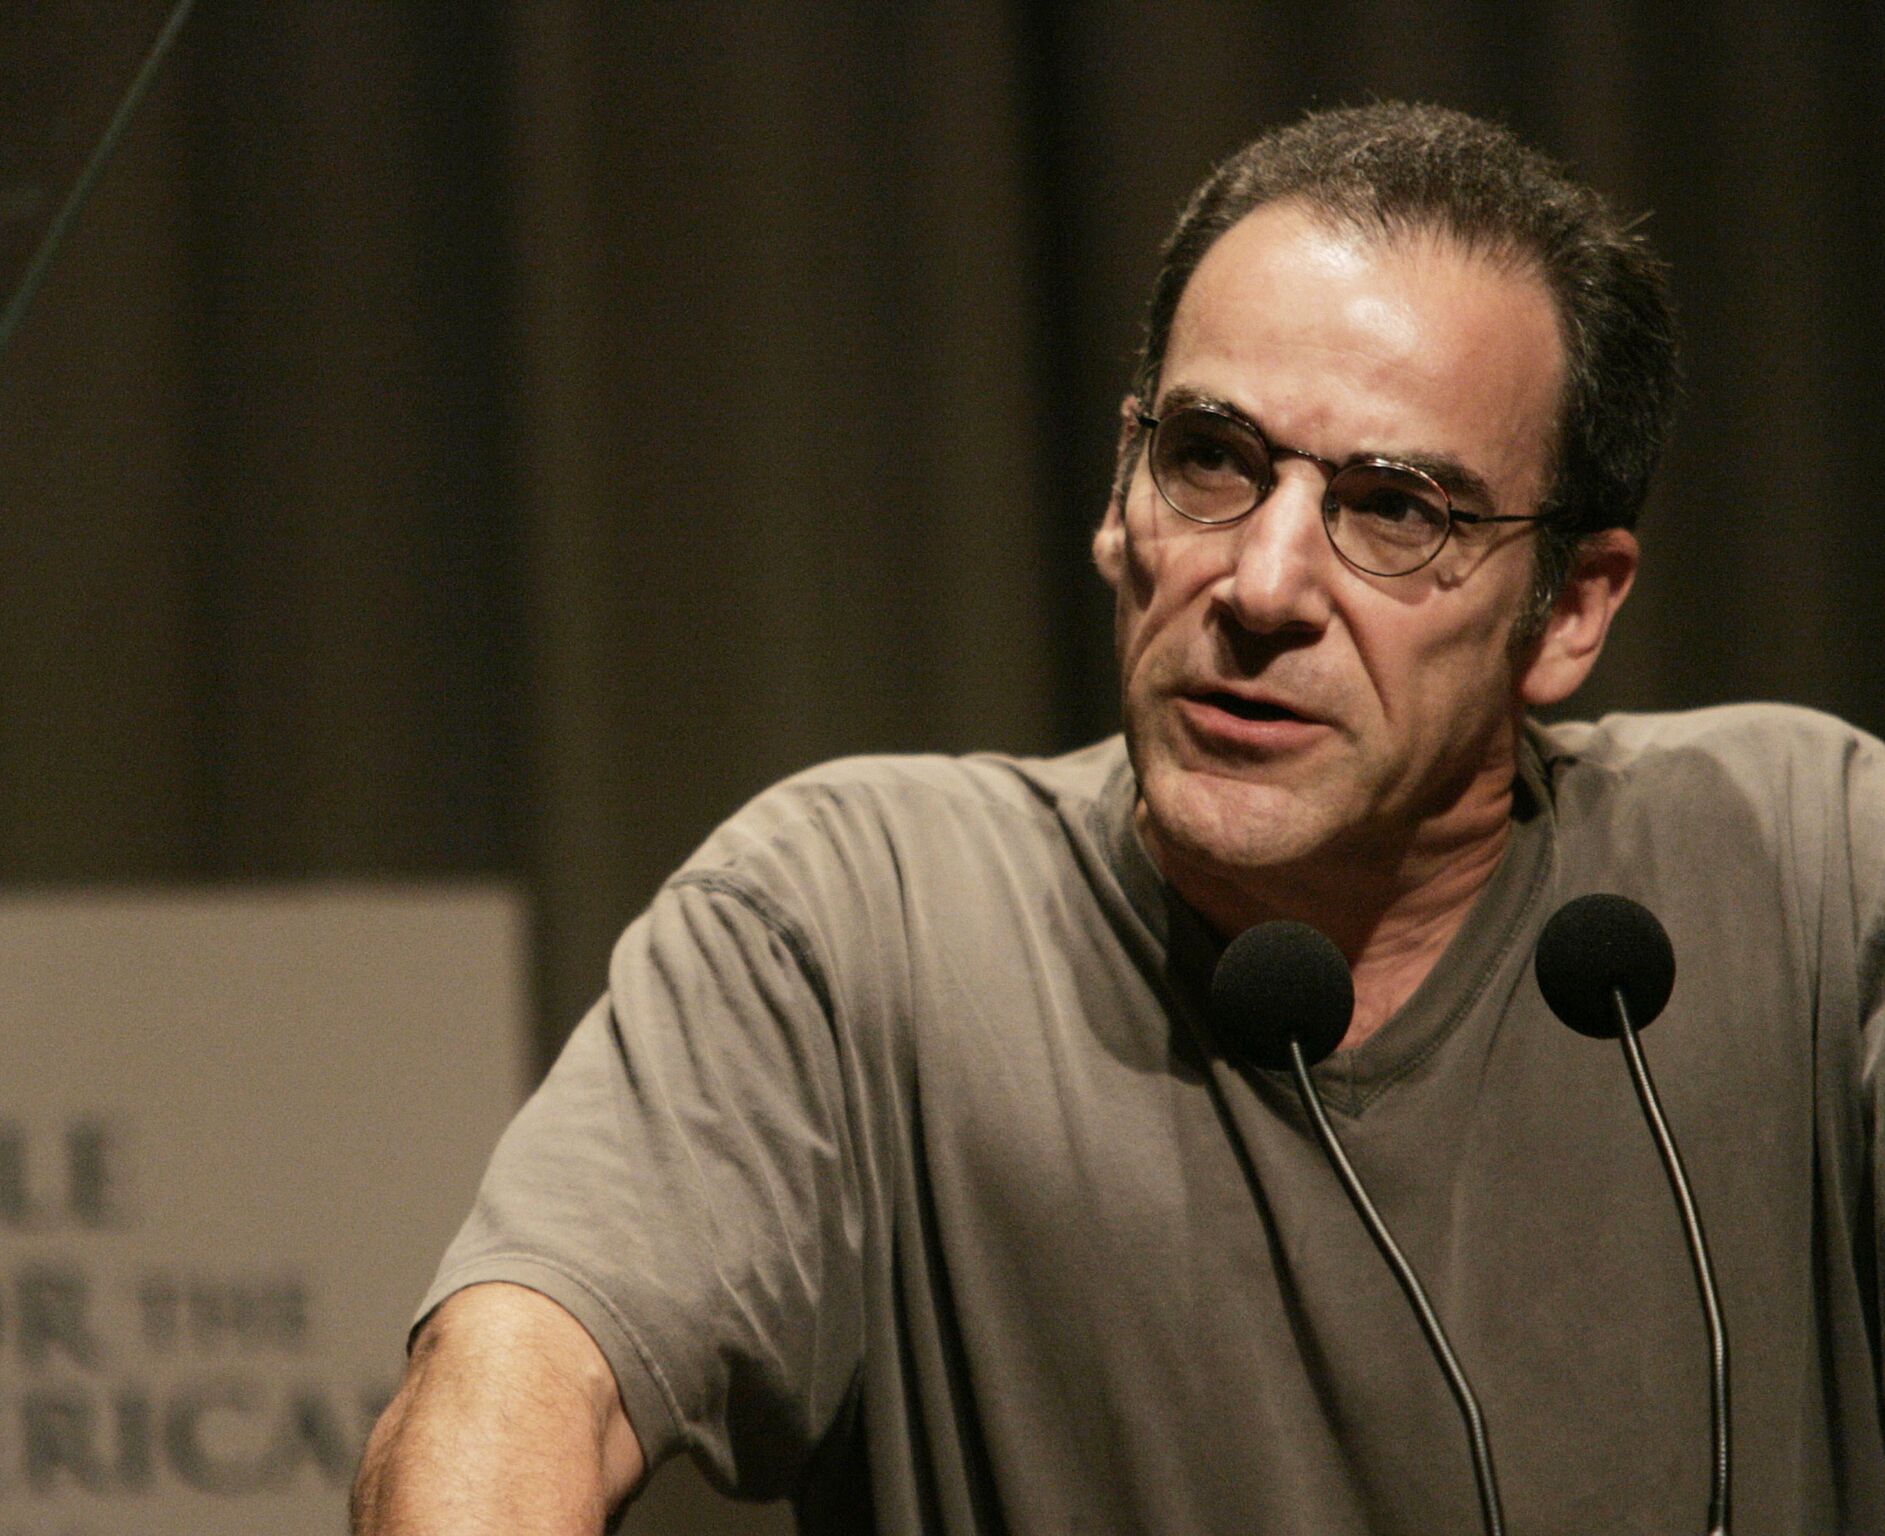  Mandy Patinkin attends a reading of the U.S. Constitution at Cooper Union for the People For the American Way Foundation  | Getty Images